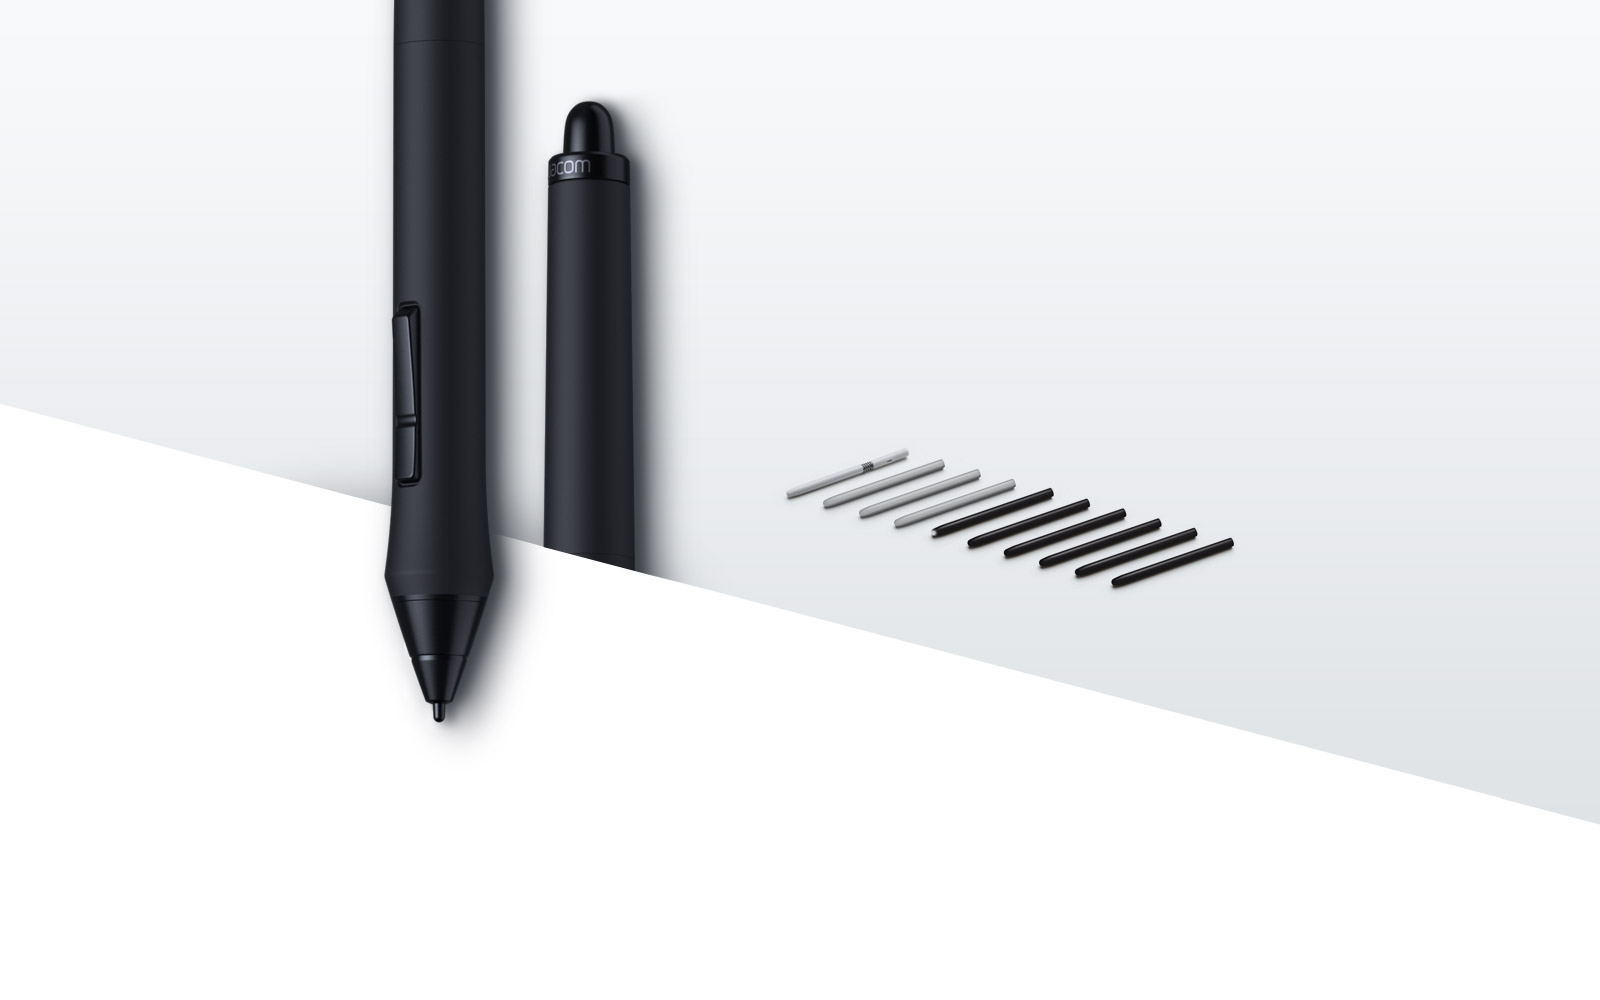 Intuos Pro Small Digital Tablet for Drawing on Mac